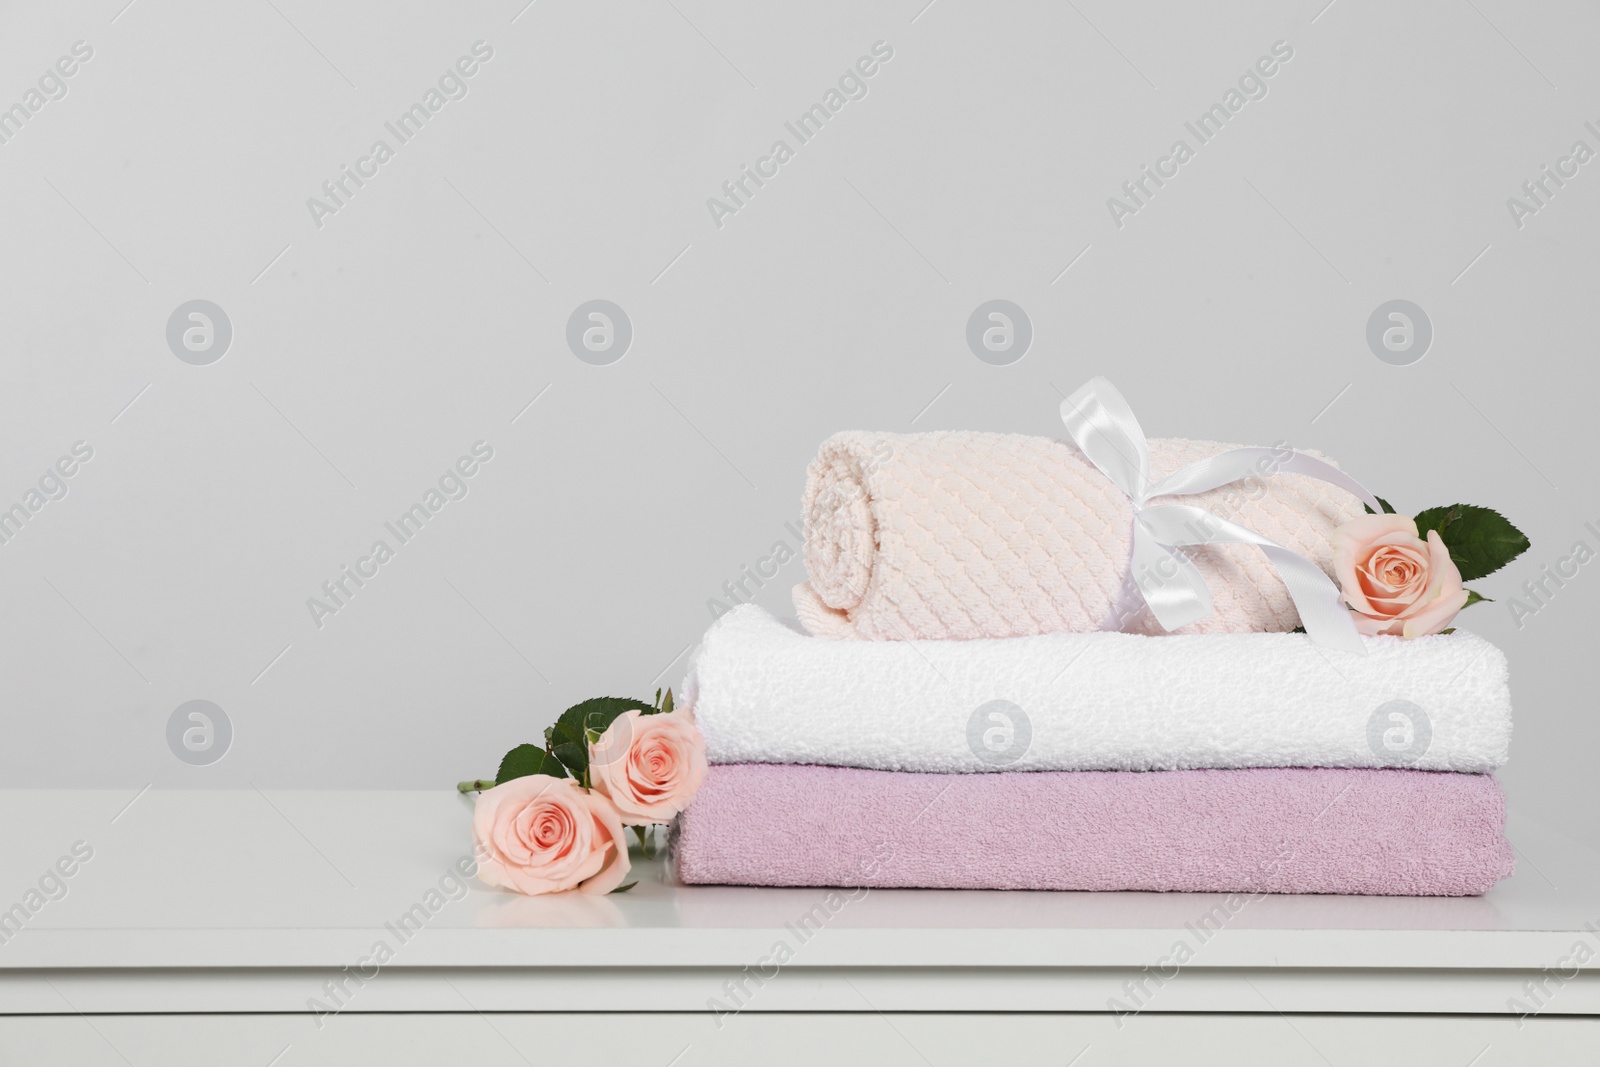 Photo of Clean soft towels with flowers on white table against light grey background. Space for text